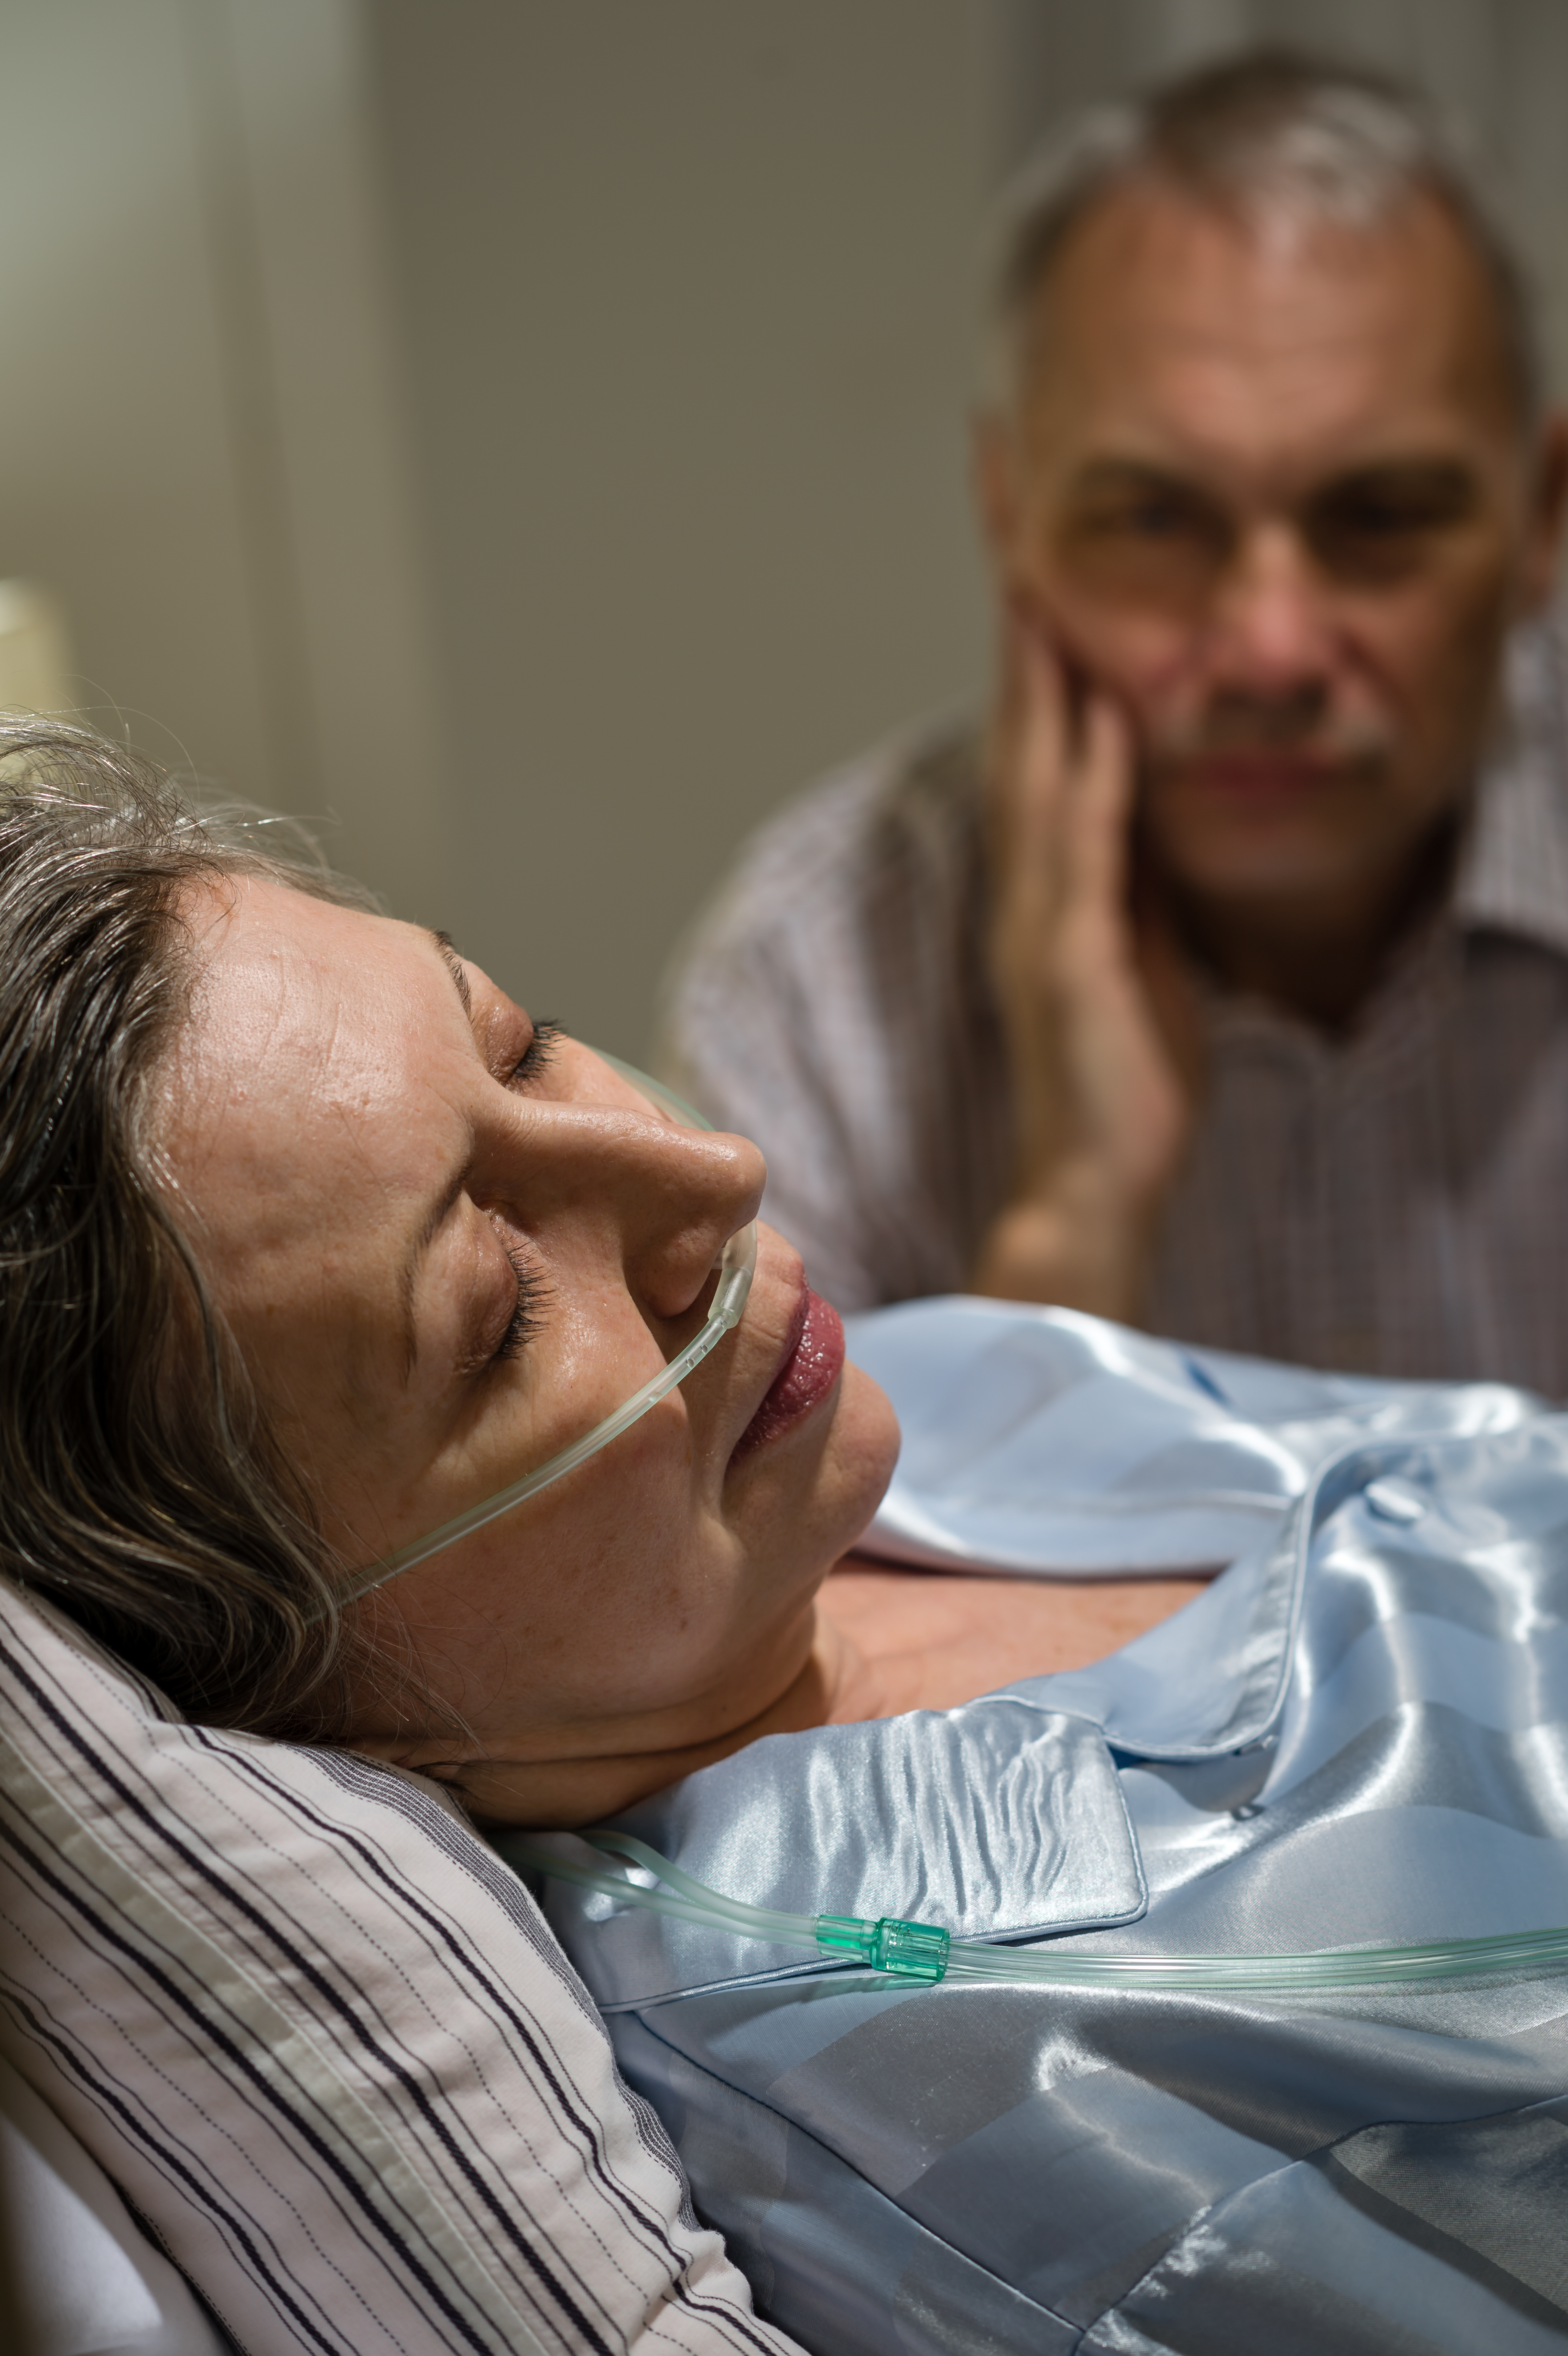 An ailing woman in hospital with a man beside her | Source: Shutterstock